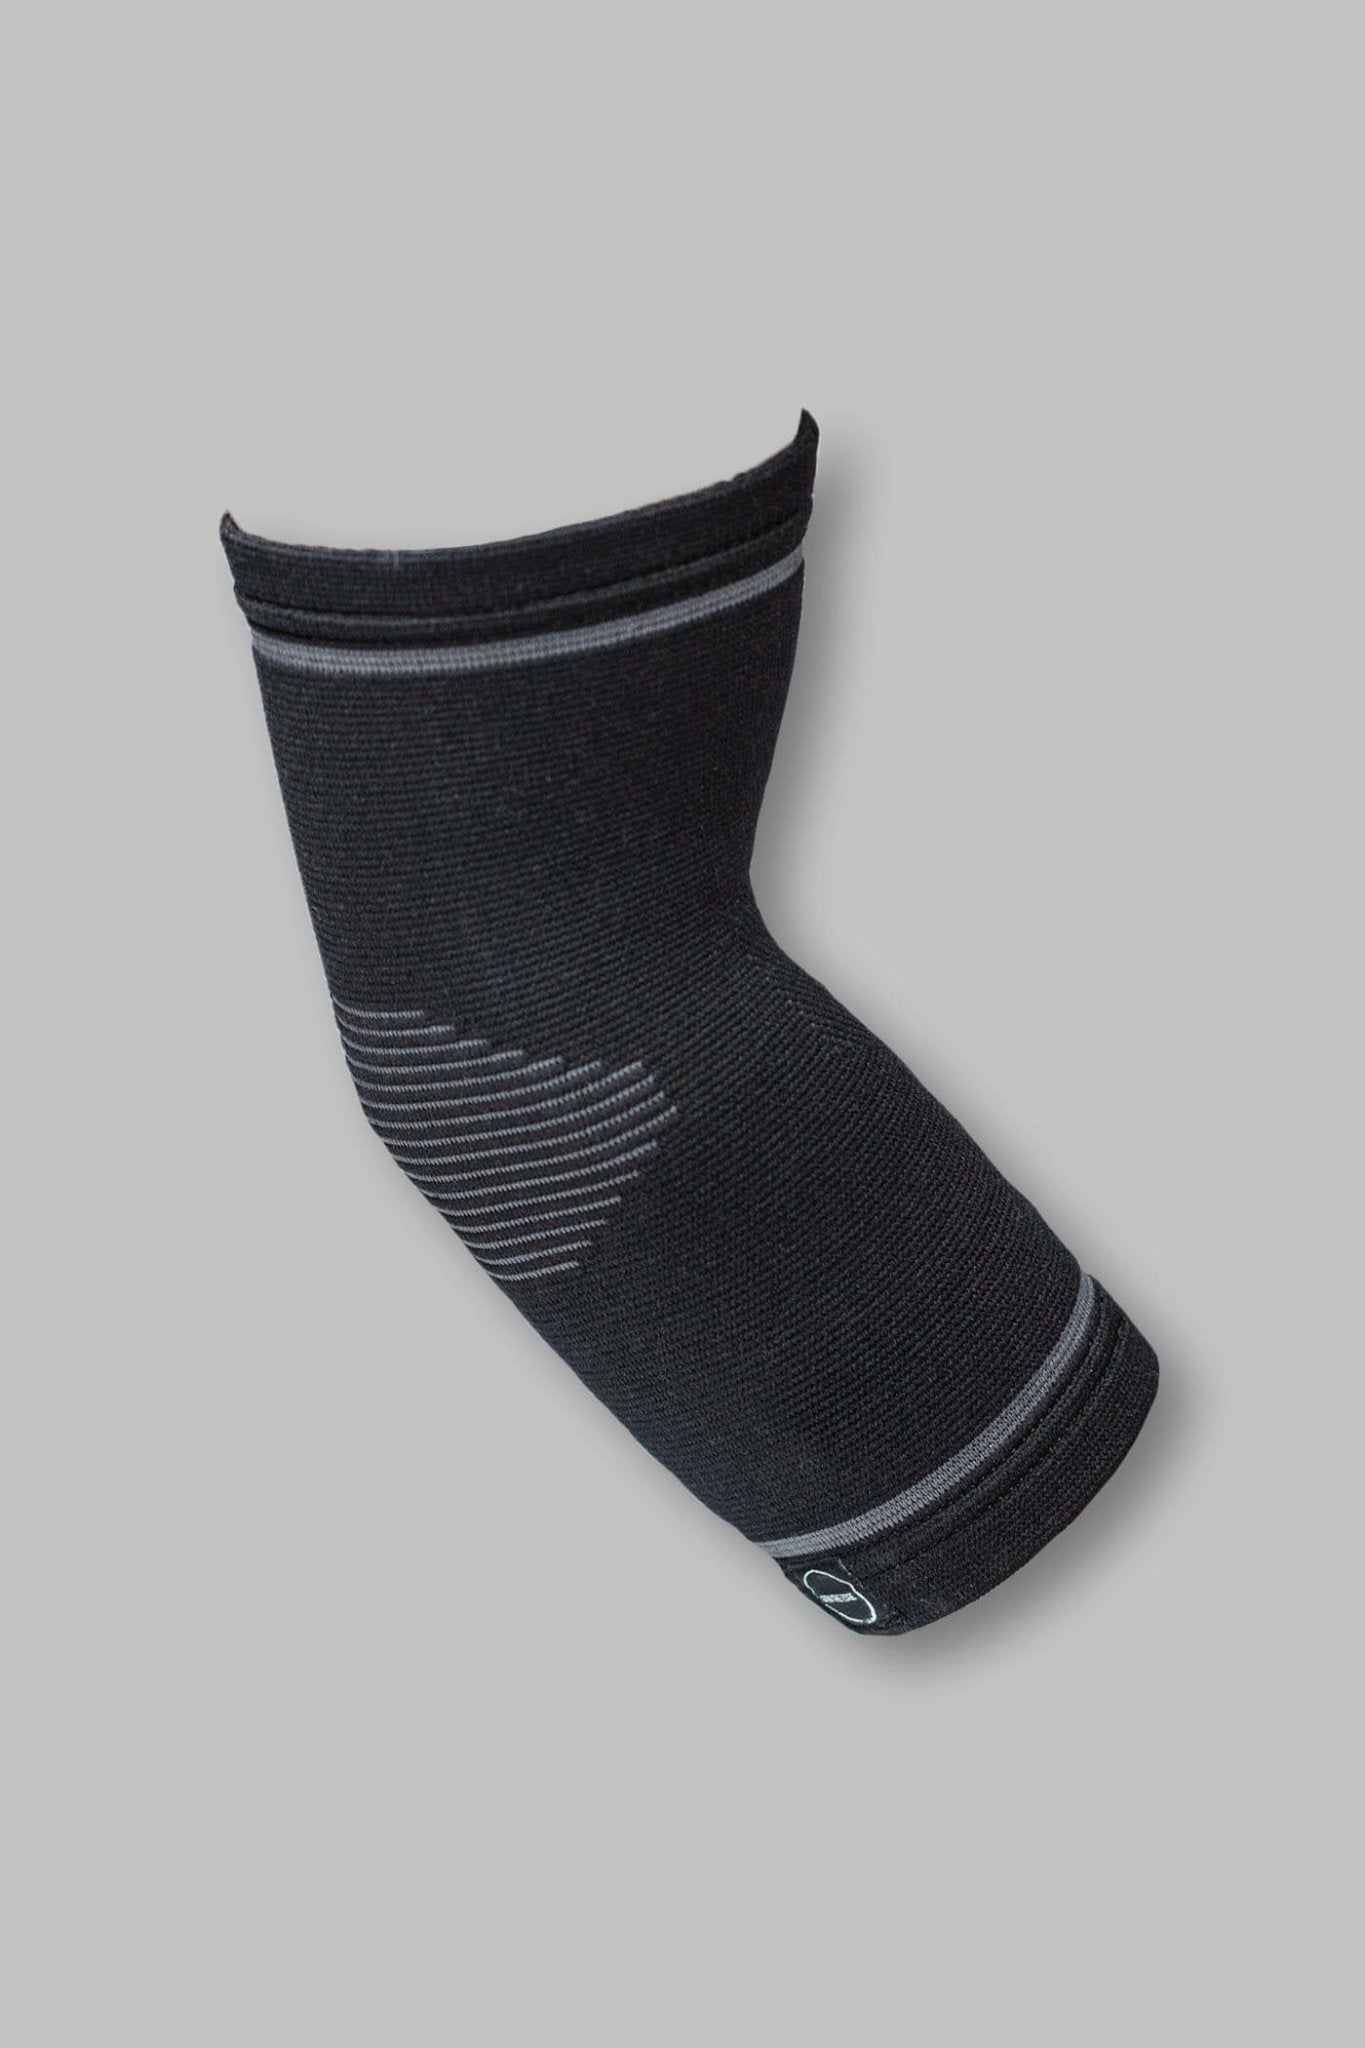 Elbow Support in Black - Gain The Edge US